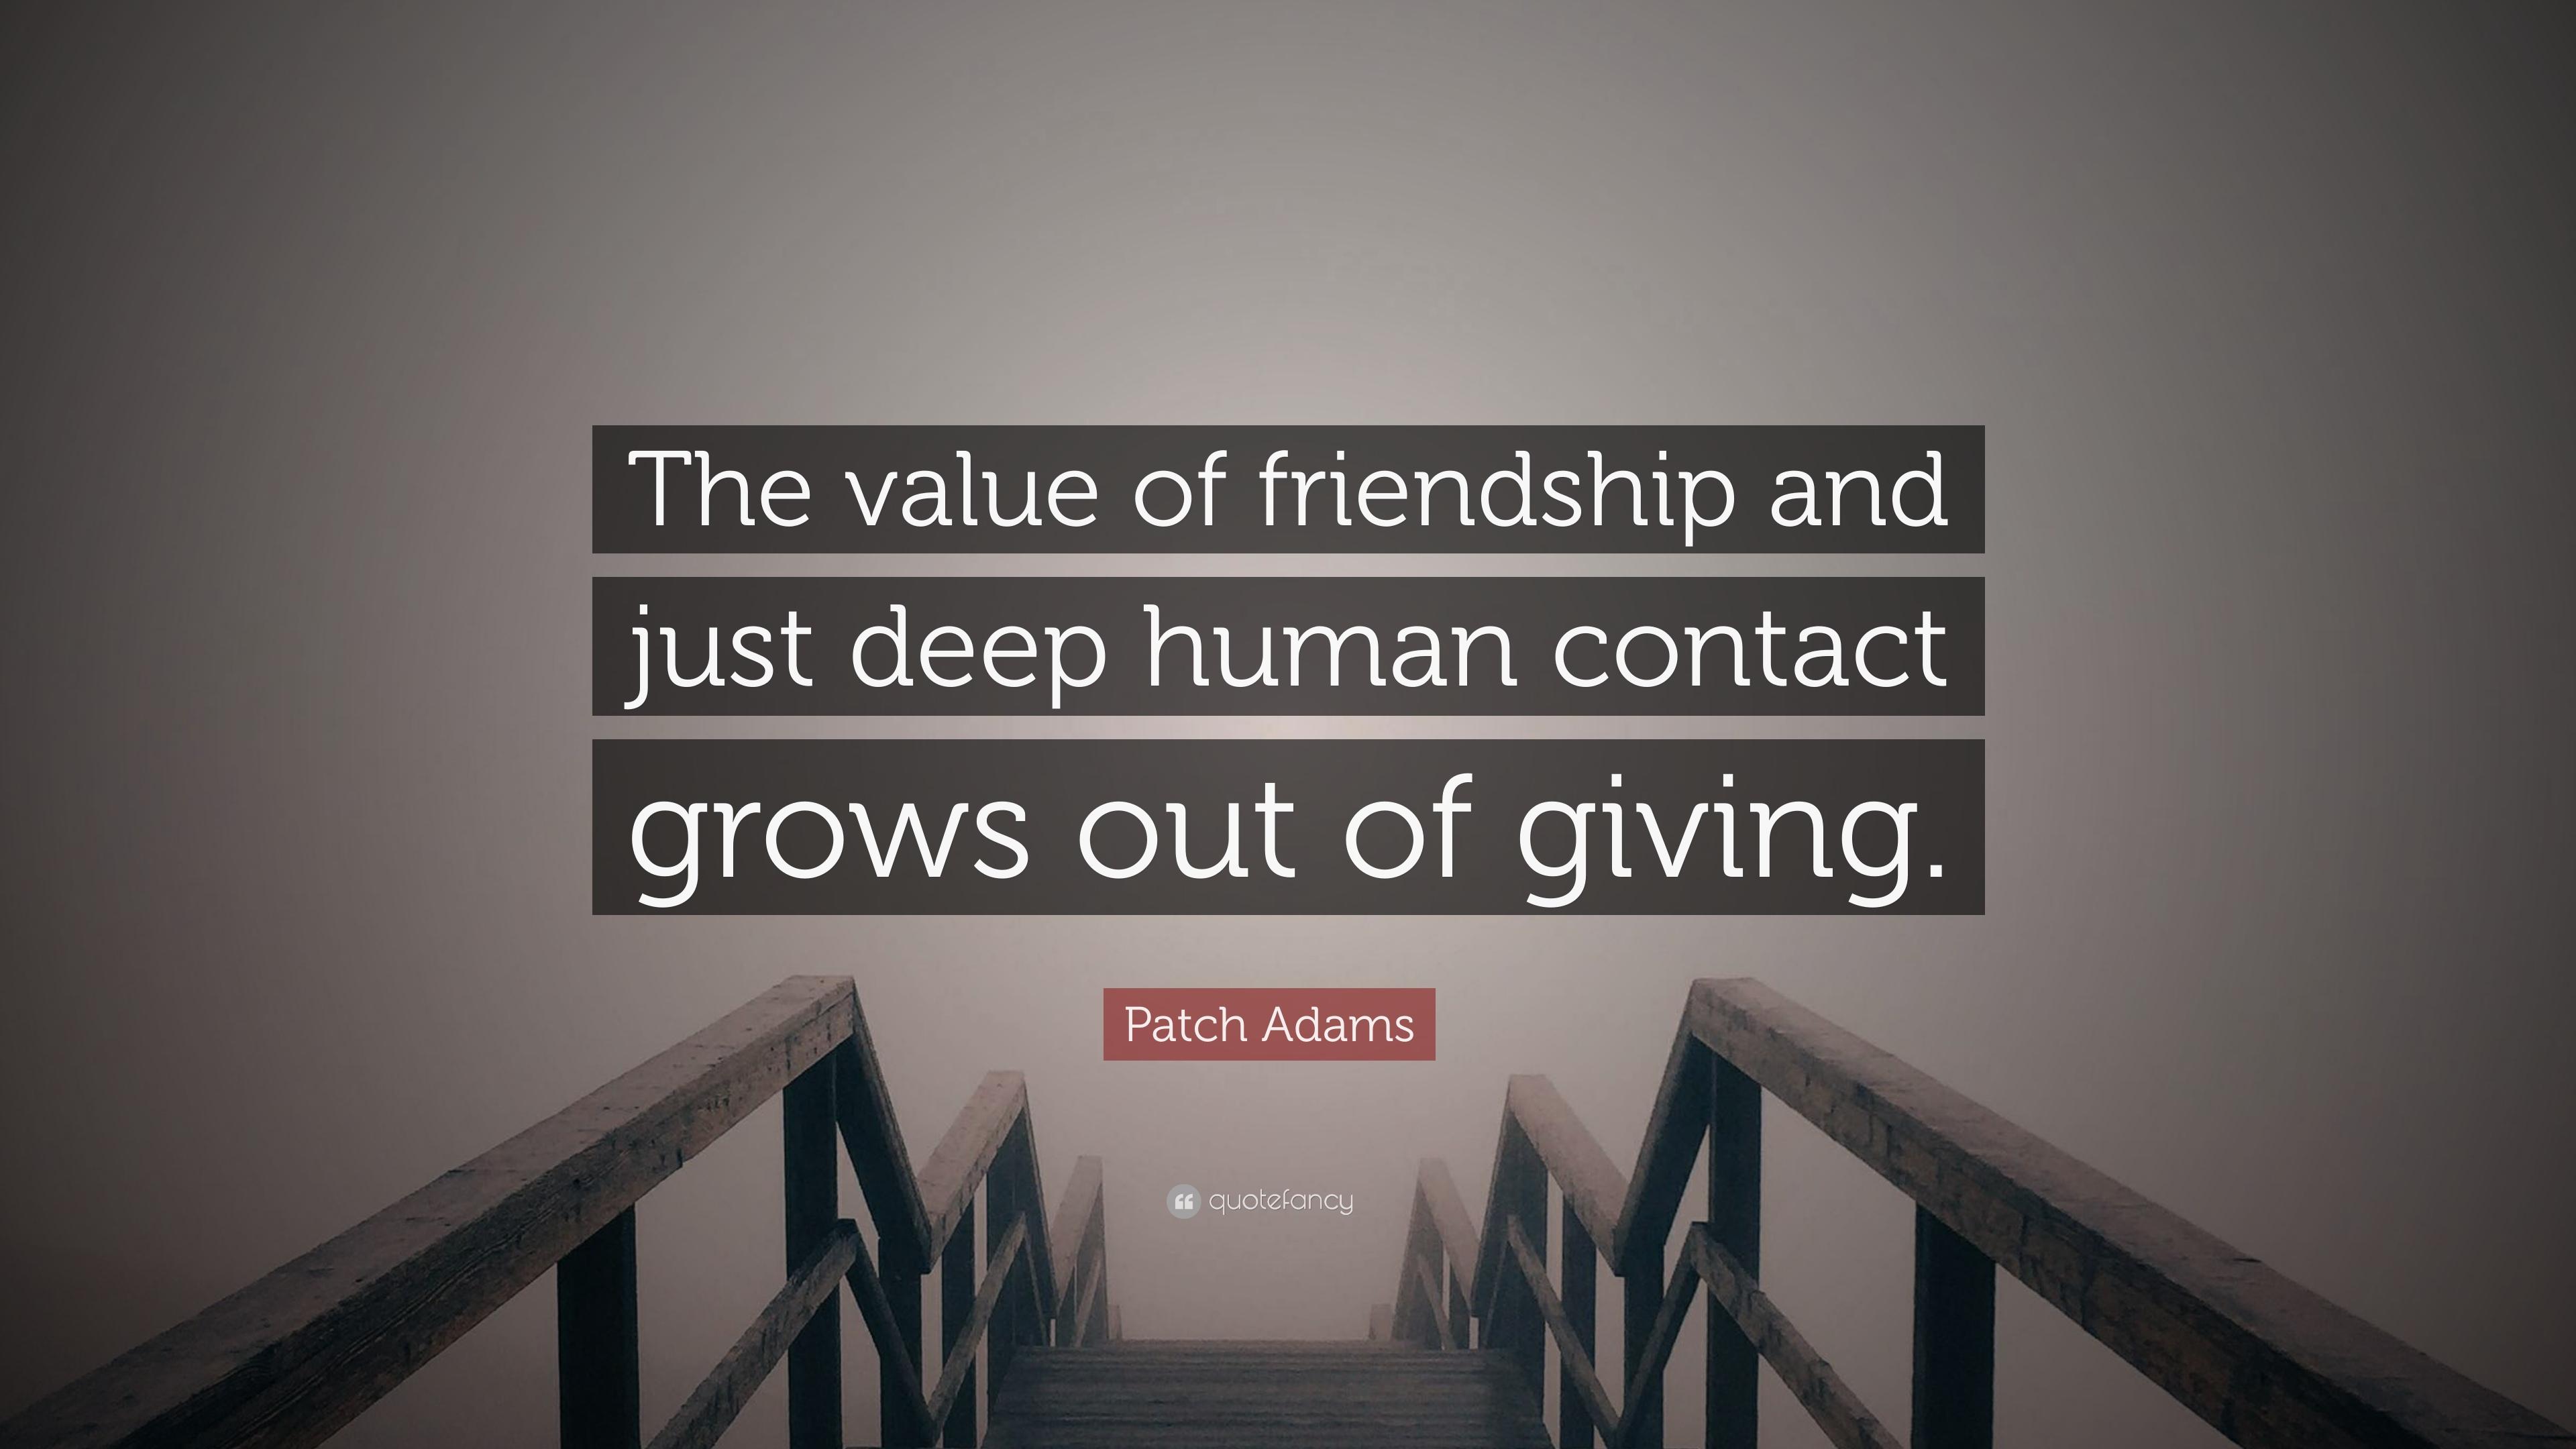 Patch Adams Quote: “The value of friendship and just deep human